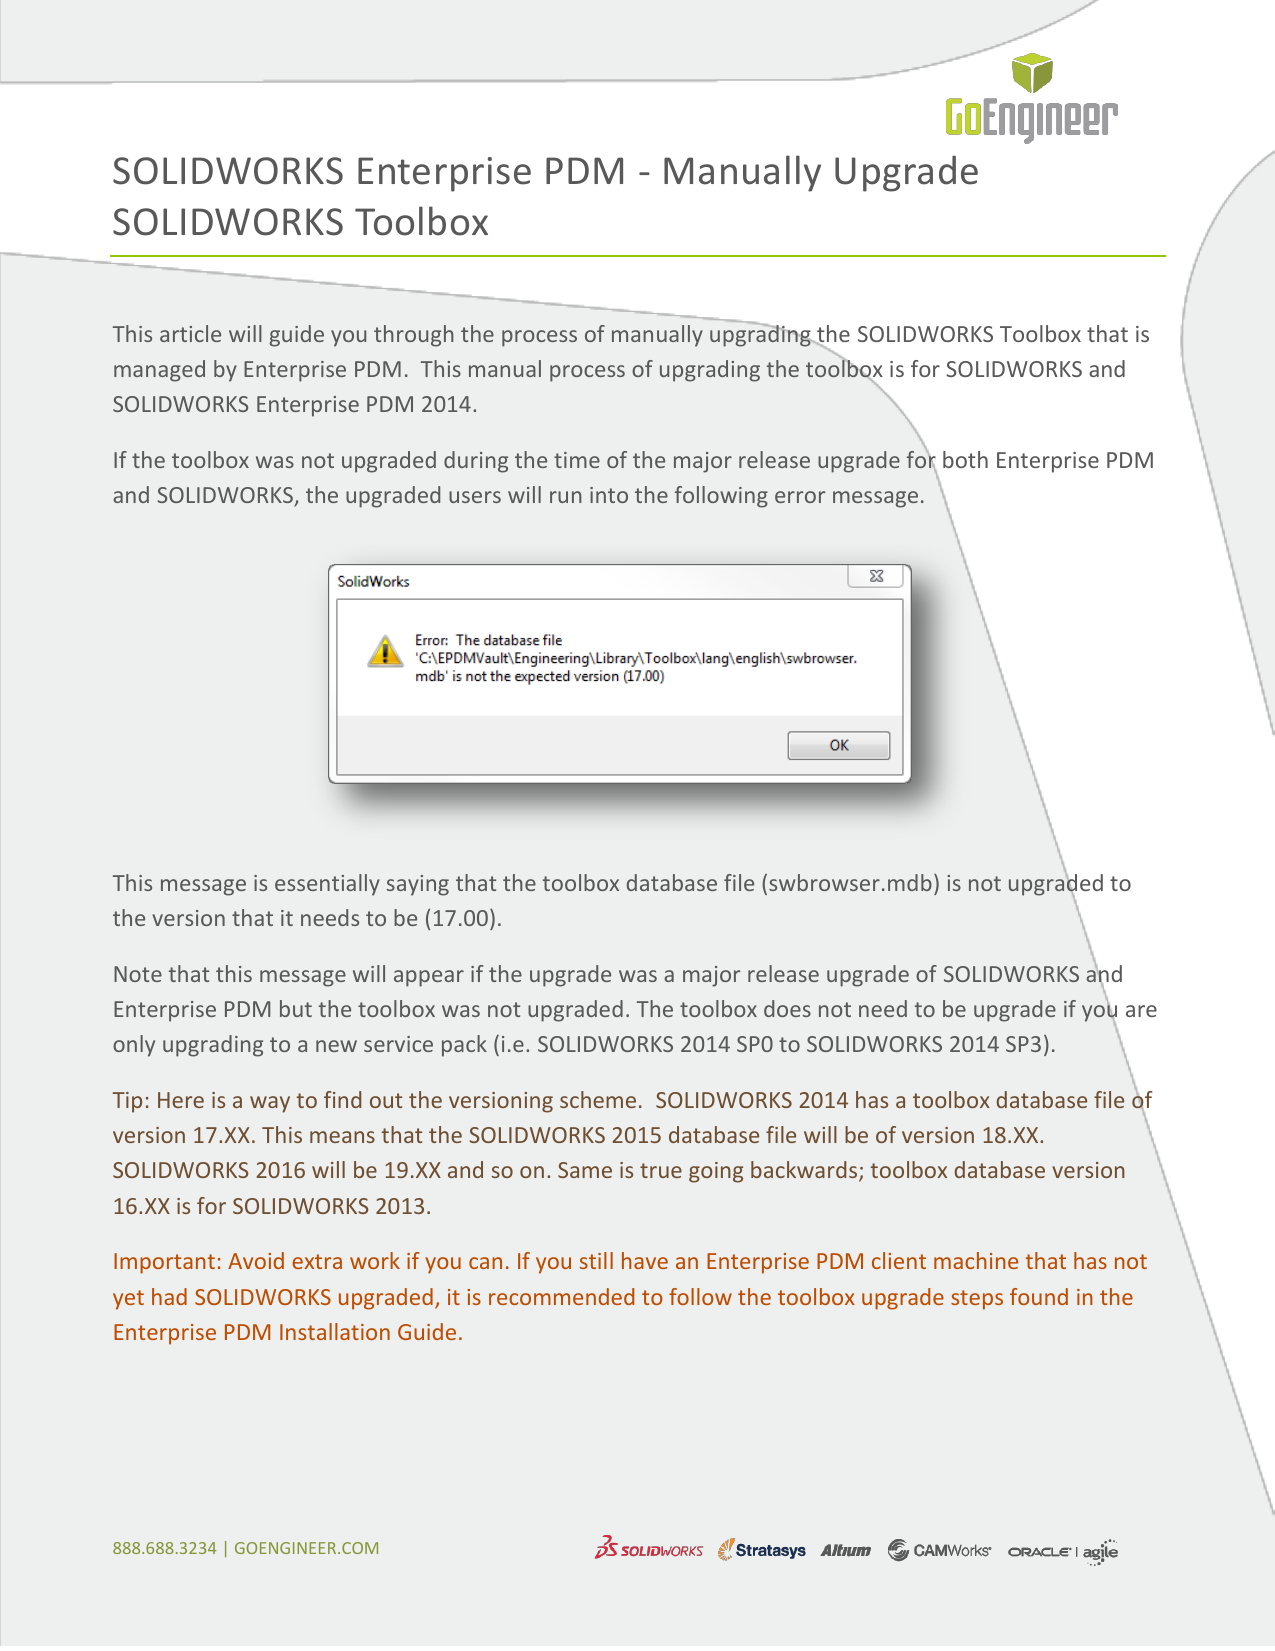 solidworks toolbox is not installed